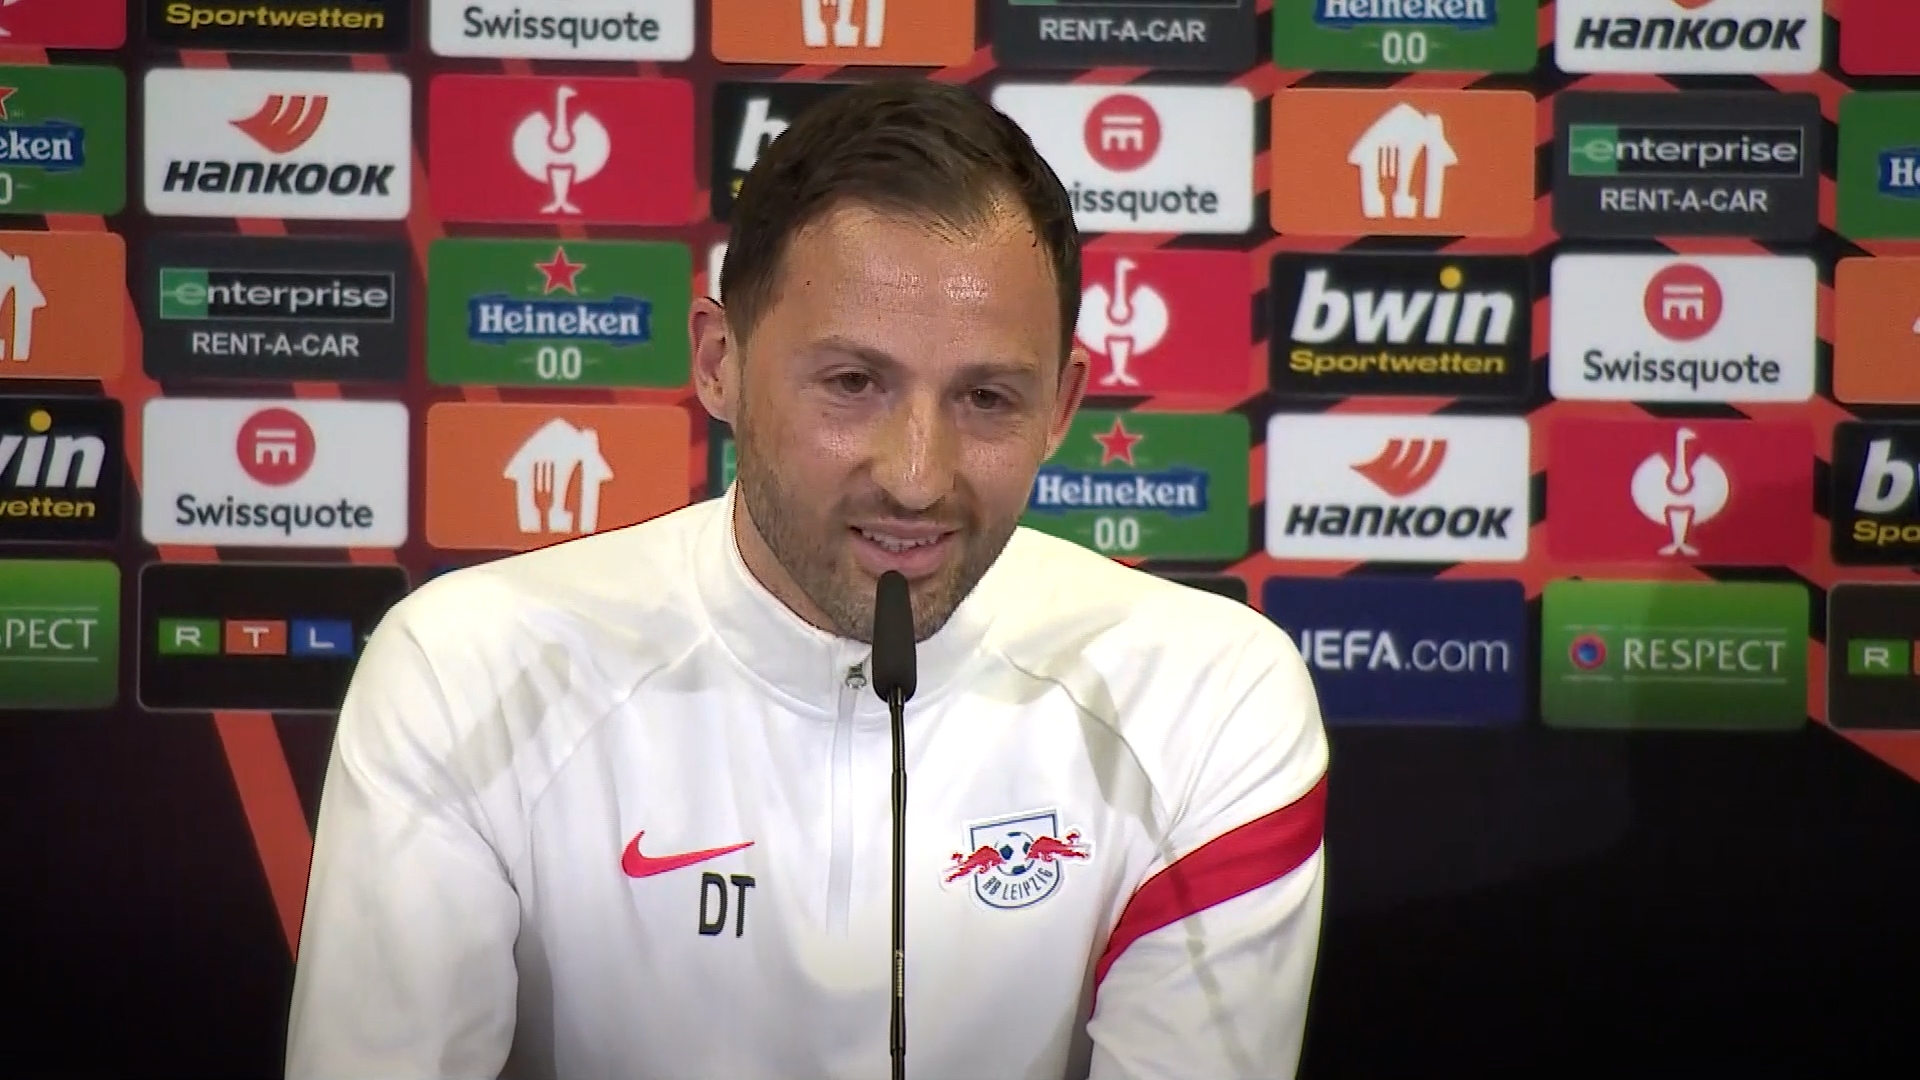 Tedesco's managerial career began five years ago at the age of 31.